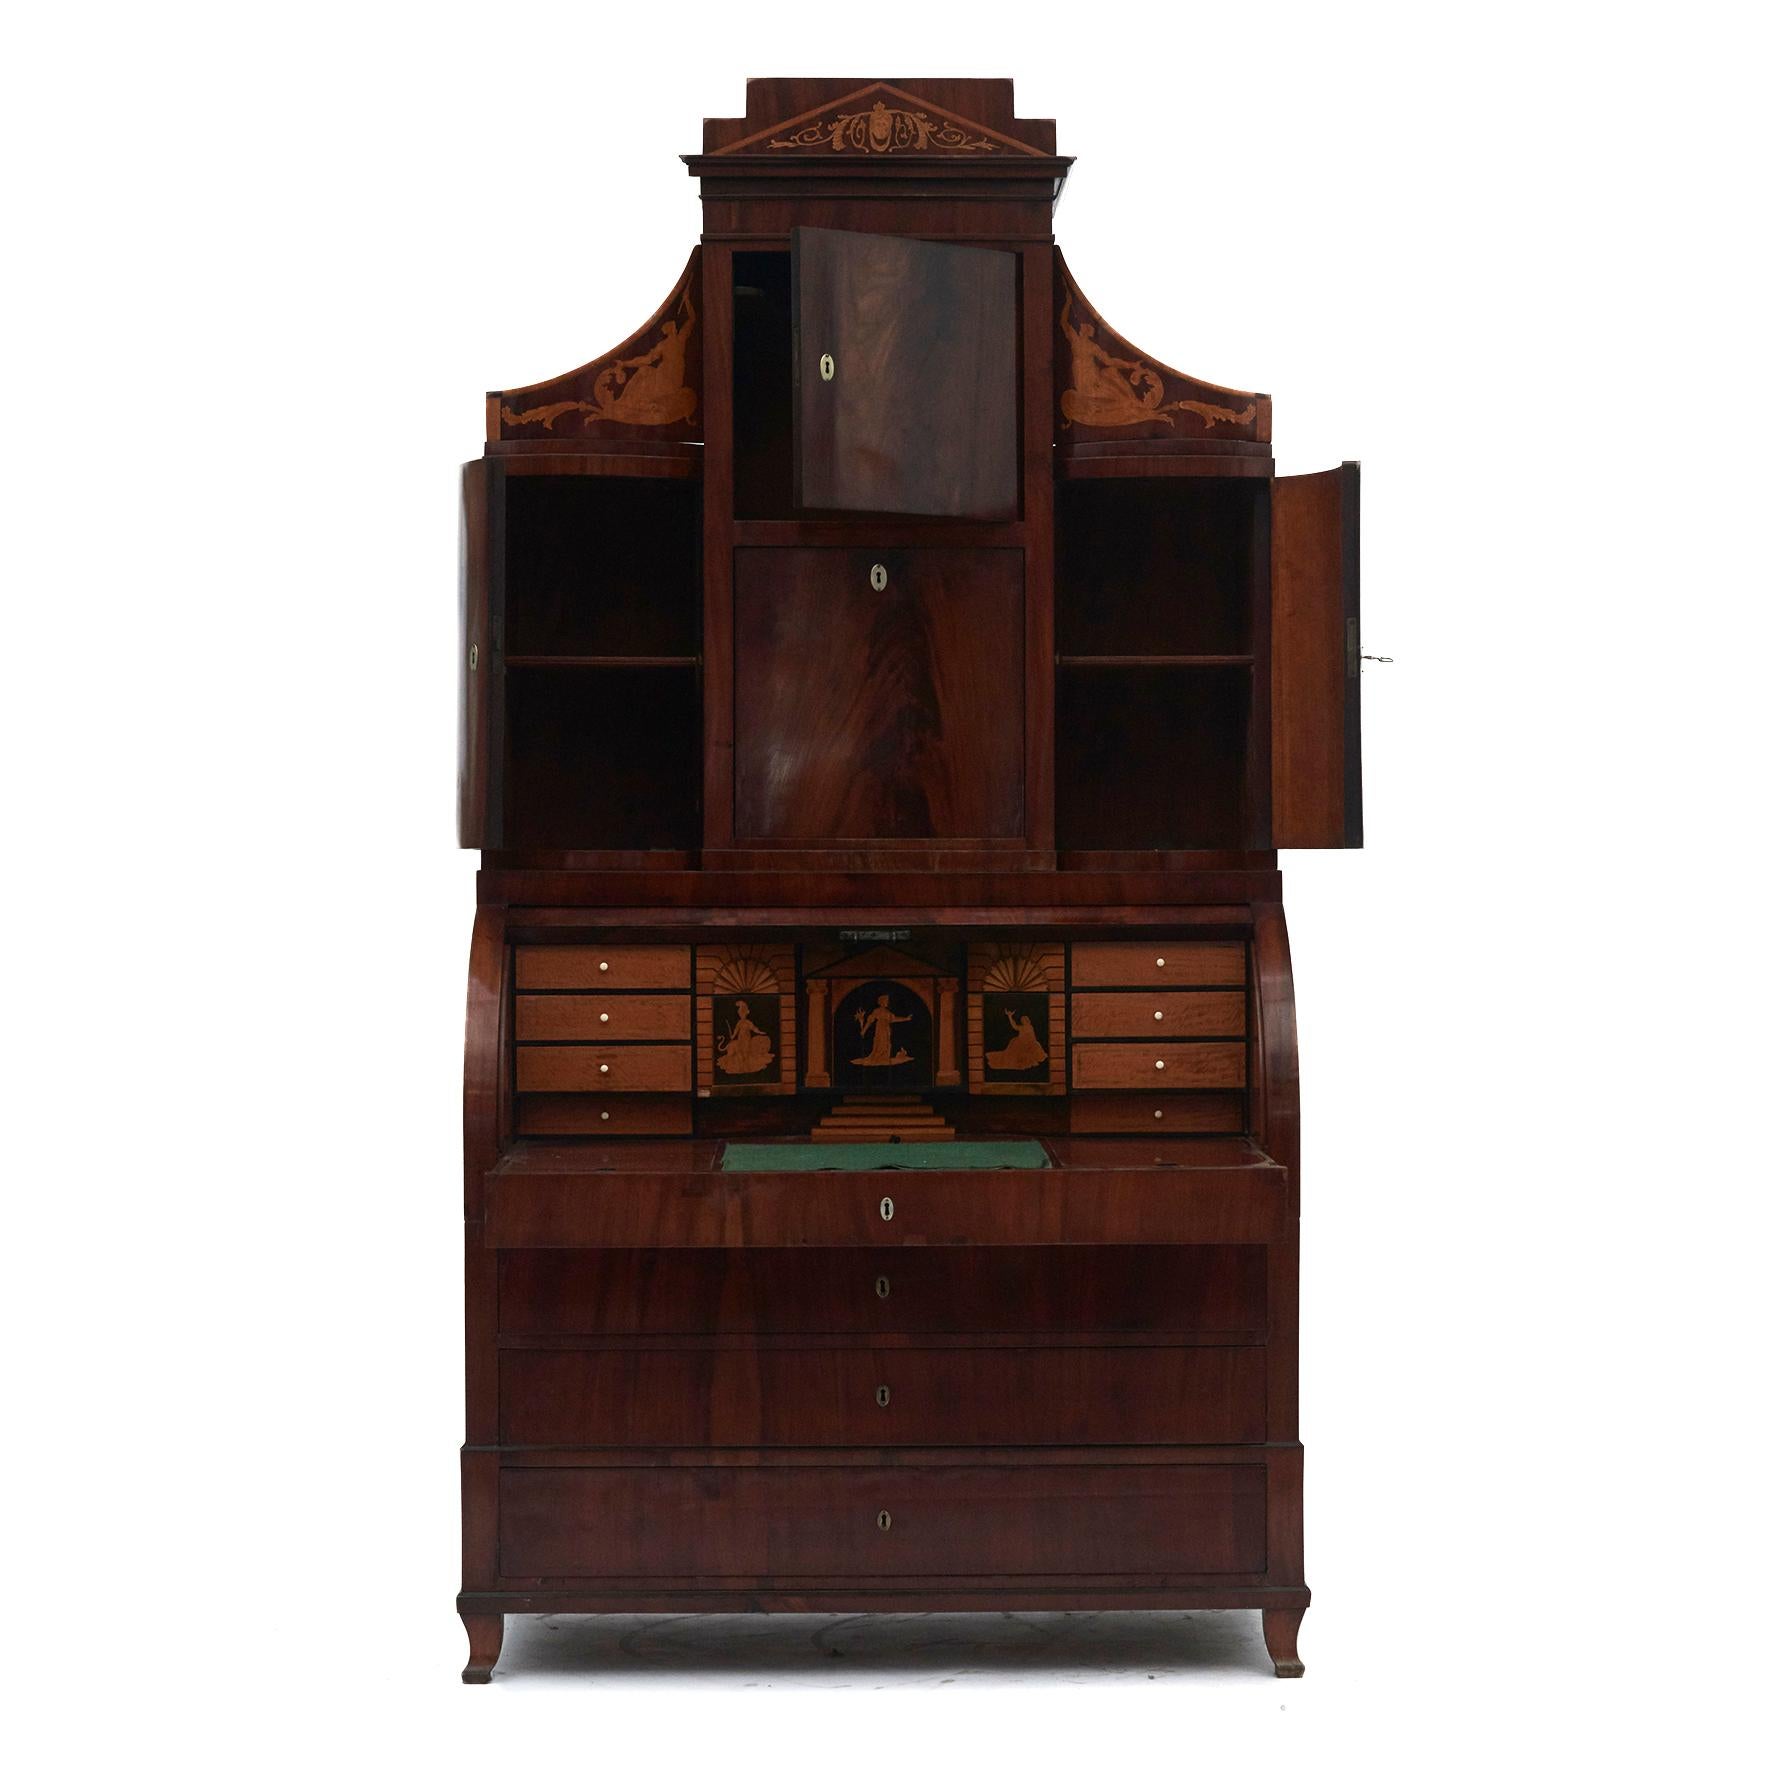 Rare Danish early 19th century secretary or slant front bureau.
Exquisitely crafted from mahogany with fabulous marquetry decoration in black nobel wood, satinwood and walnut.
A true example of beautiful, rare and refined design and excellent